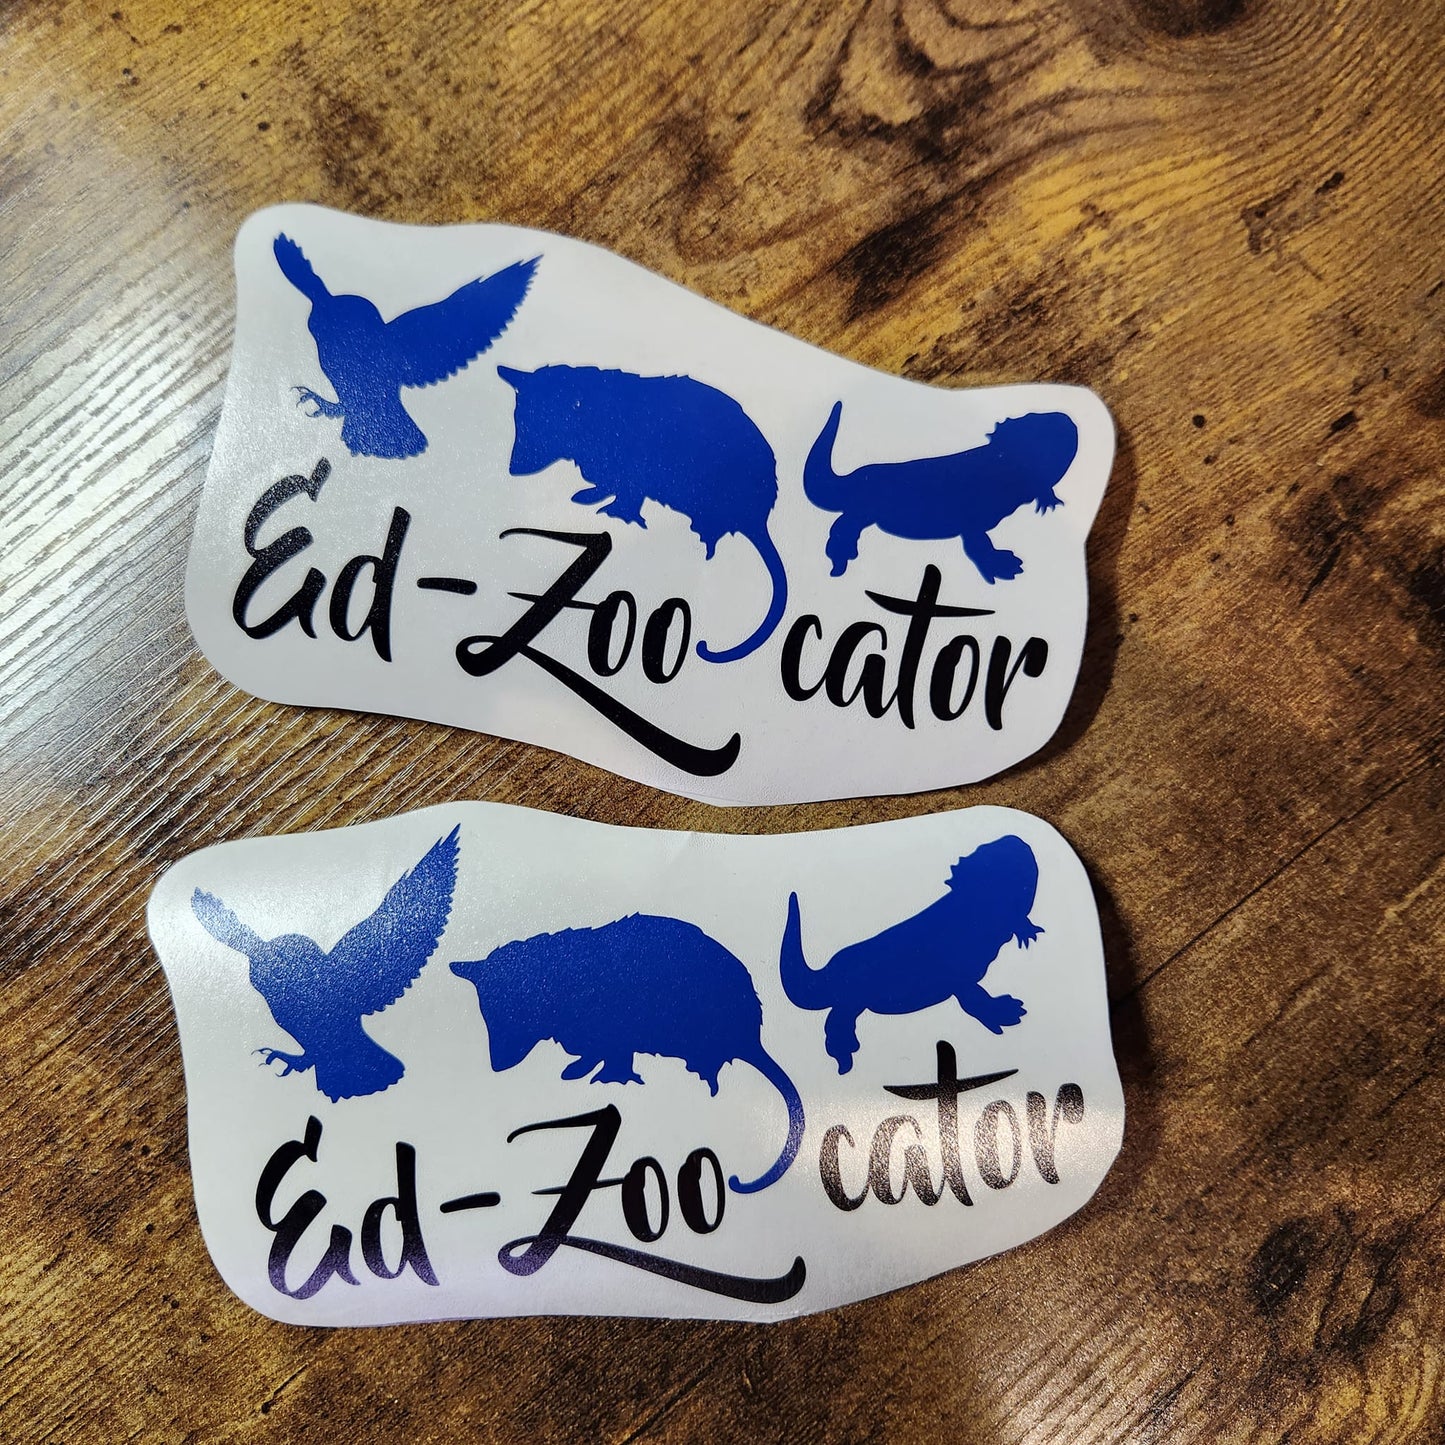 Owl, Opossum, Bearded Dragon - Ed-Zoo-cator - Vinyl Decal (Made to Order)